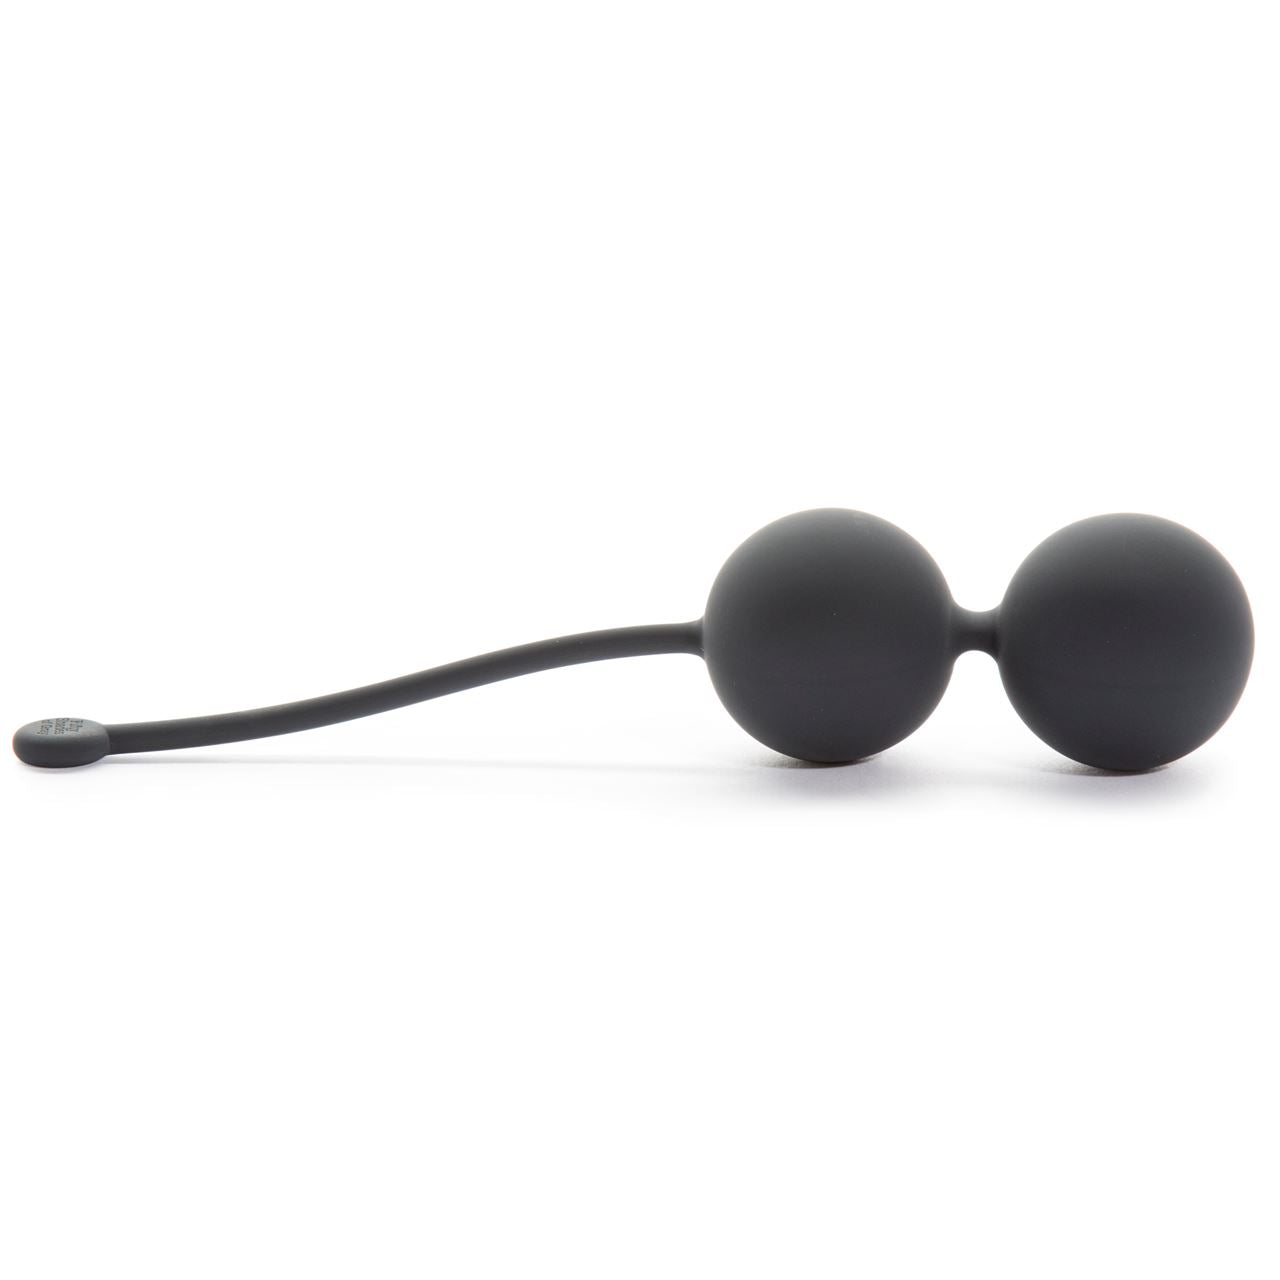 Fifty Shades of Grey Tighten and Tense Silicone Jiggle Balls - UABDSM